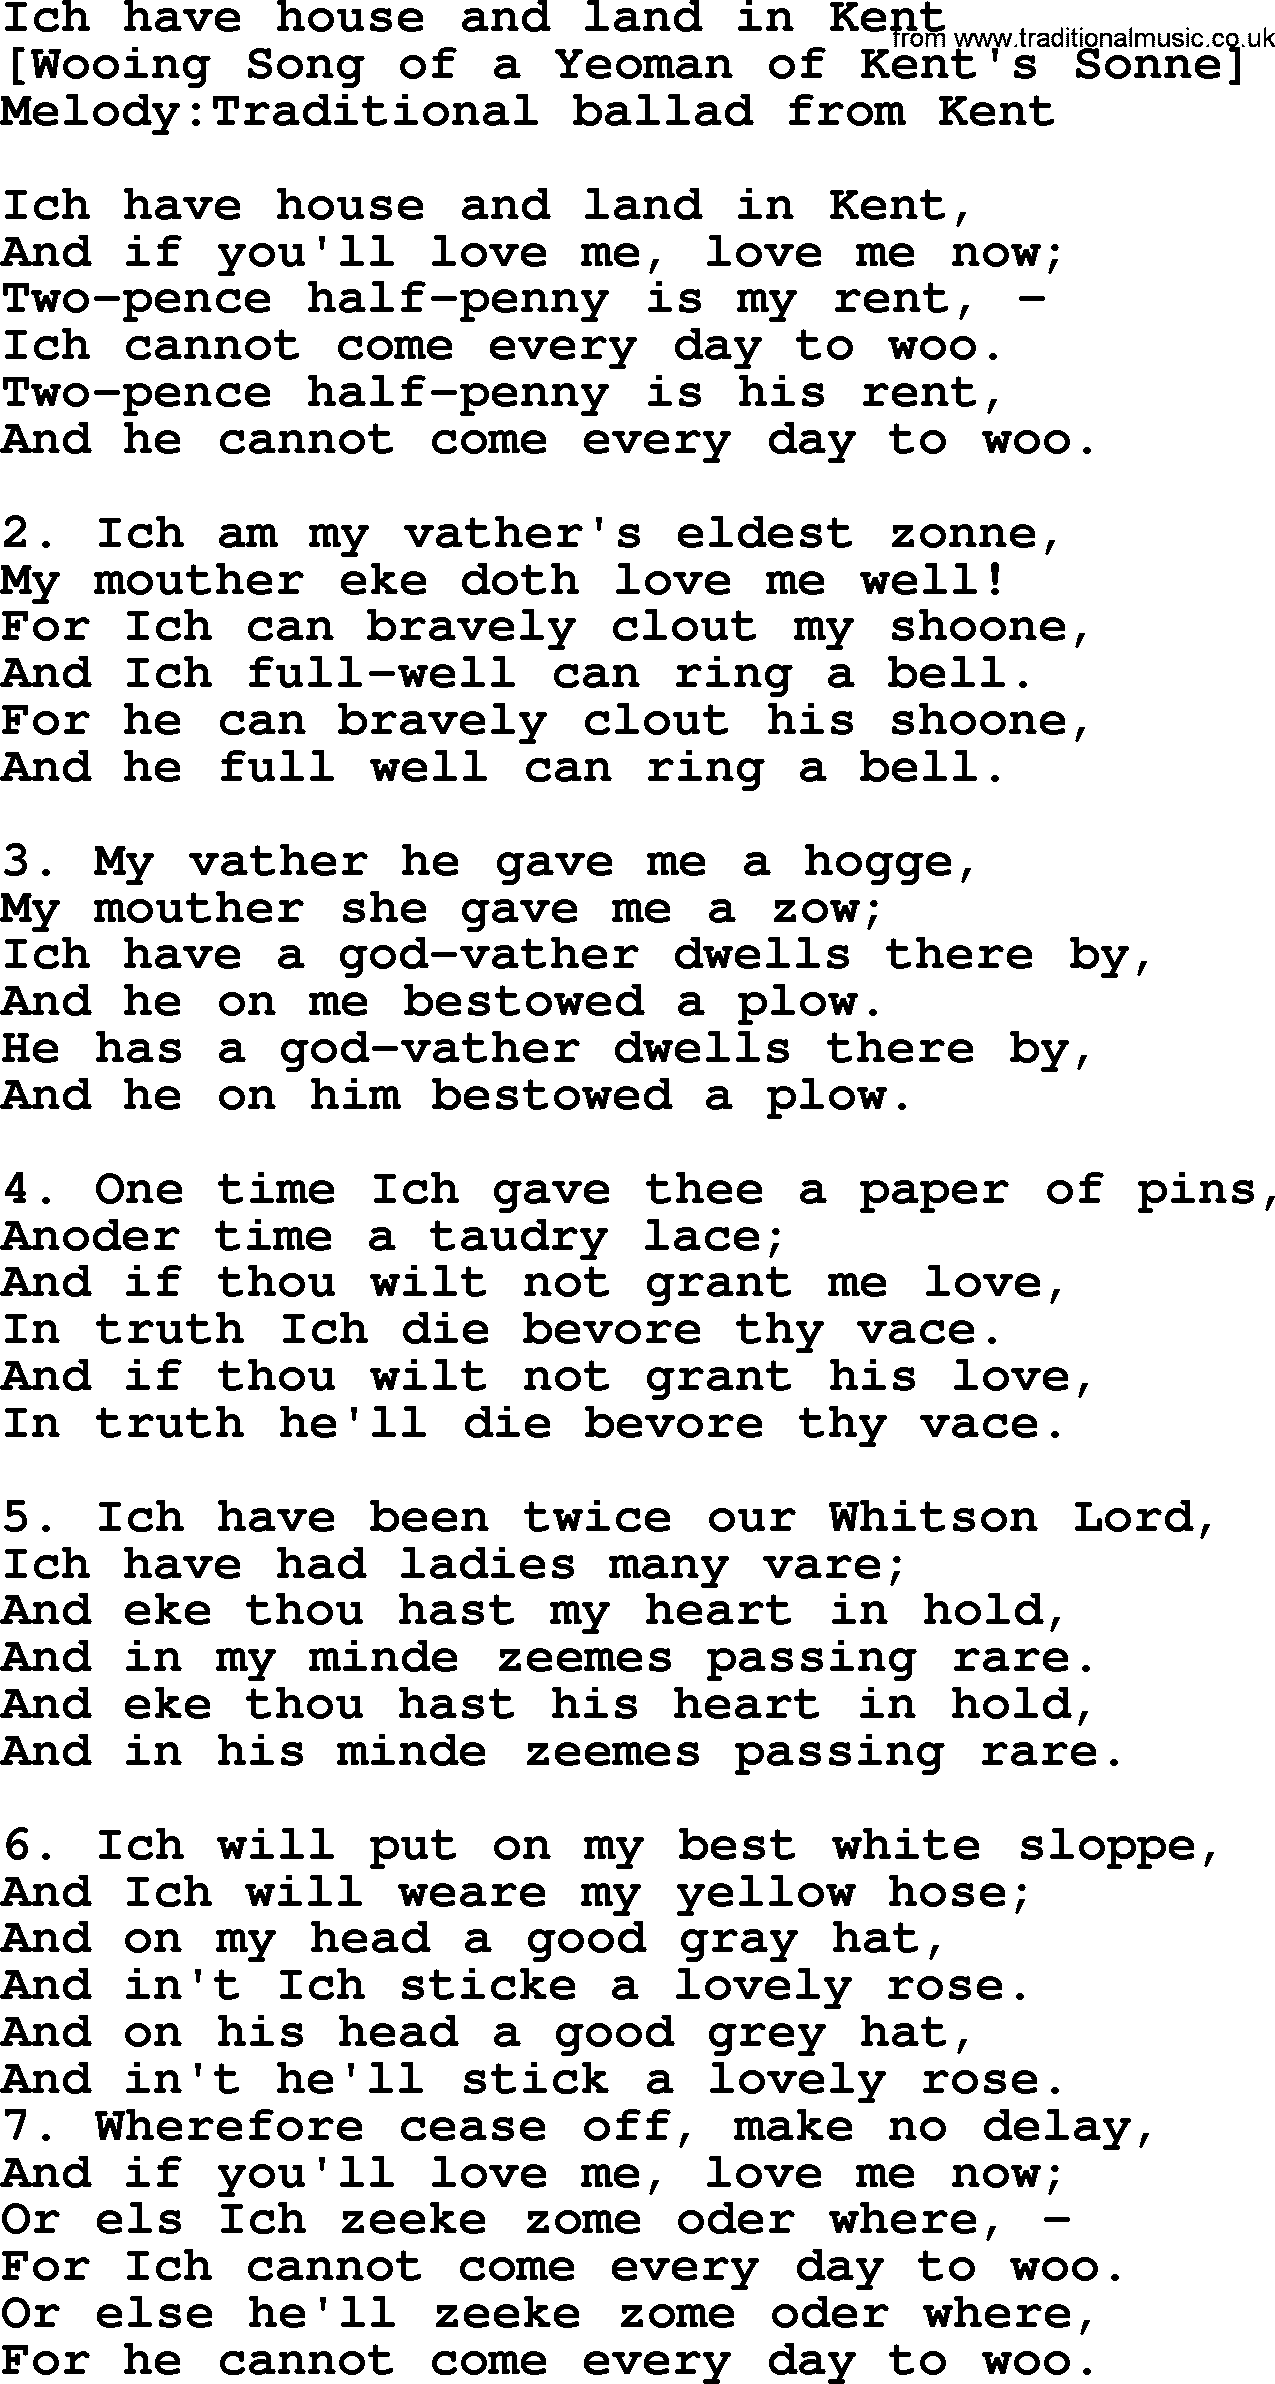 Old English Song: Ich Have House And Land In Kent lyrics